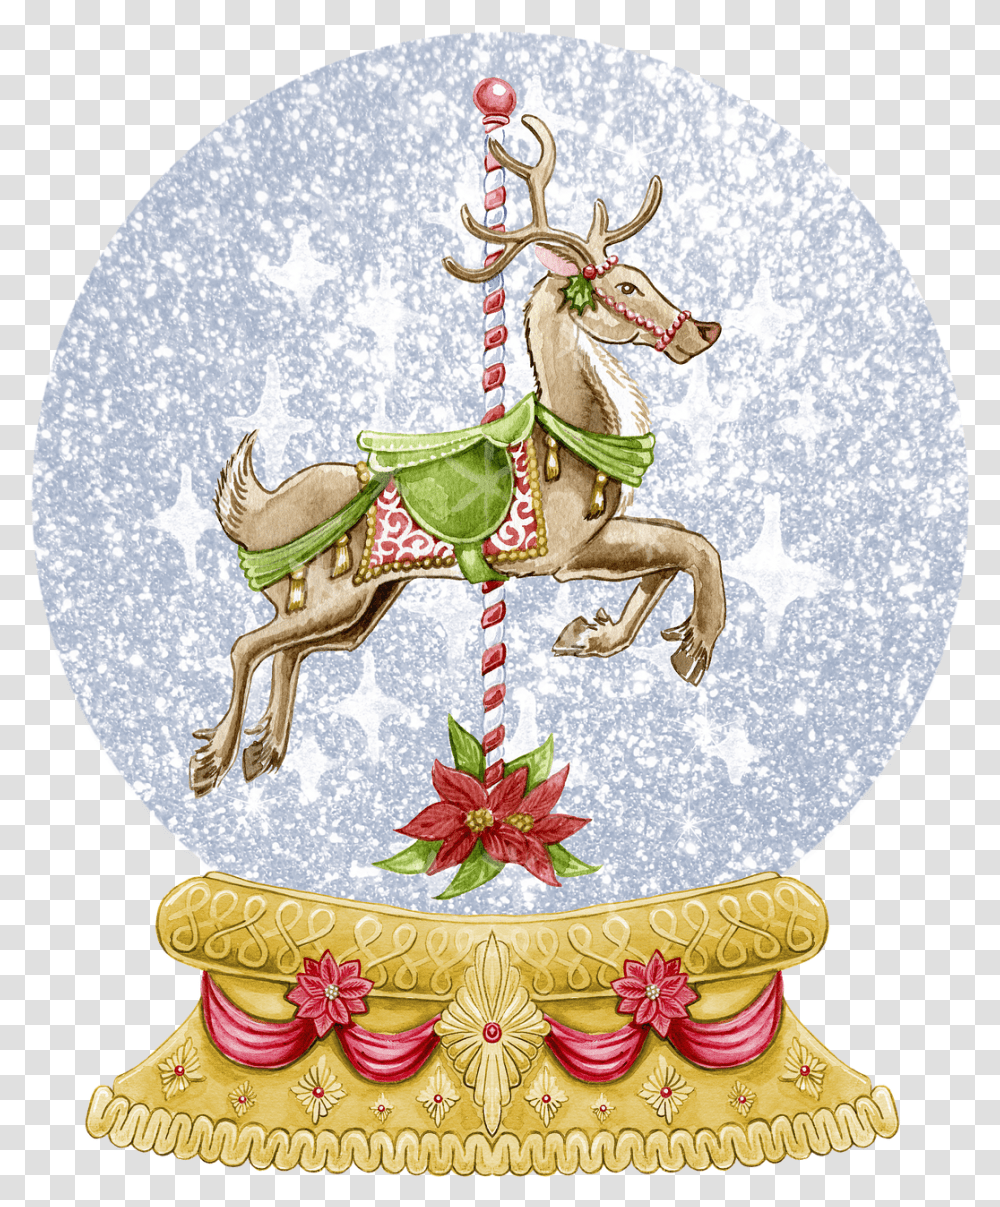 Snow Globe Carousel Horse Free Image On Pixabay Watercolour Christmas Carousel, Figurine, Tree, Plant, Ornament Transparent Png